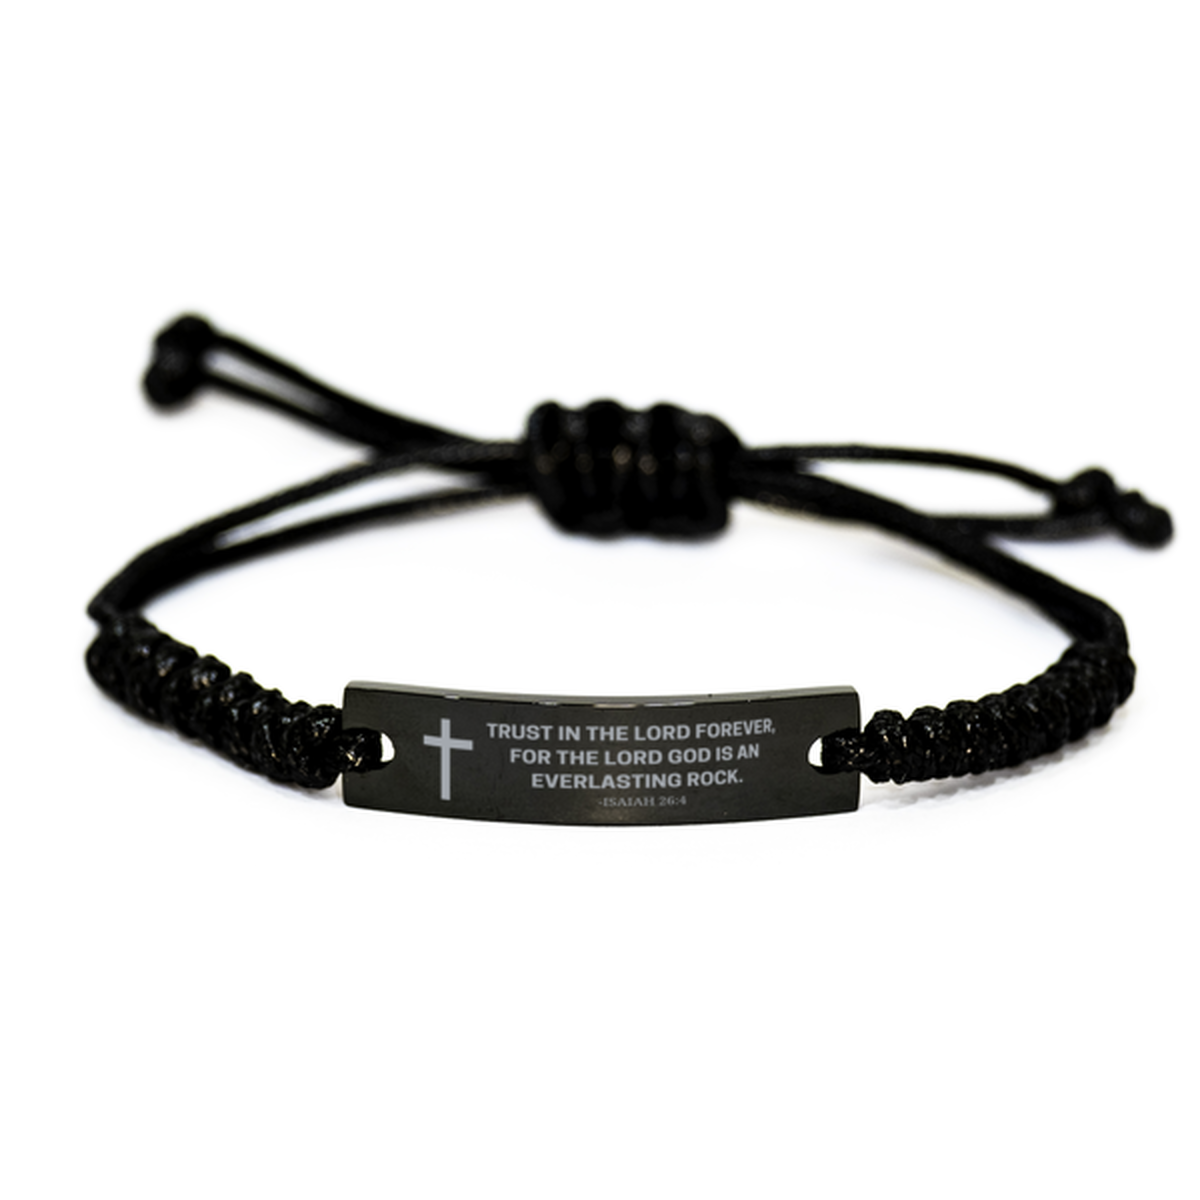 Baptism Gifts For Teenage Boys Girls, Christian Bible Verse Black Rope Bracelet, Trust in the Lord forever, Catholic Confirmation Gifts for Son, Godson, Grandson, Nephew